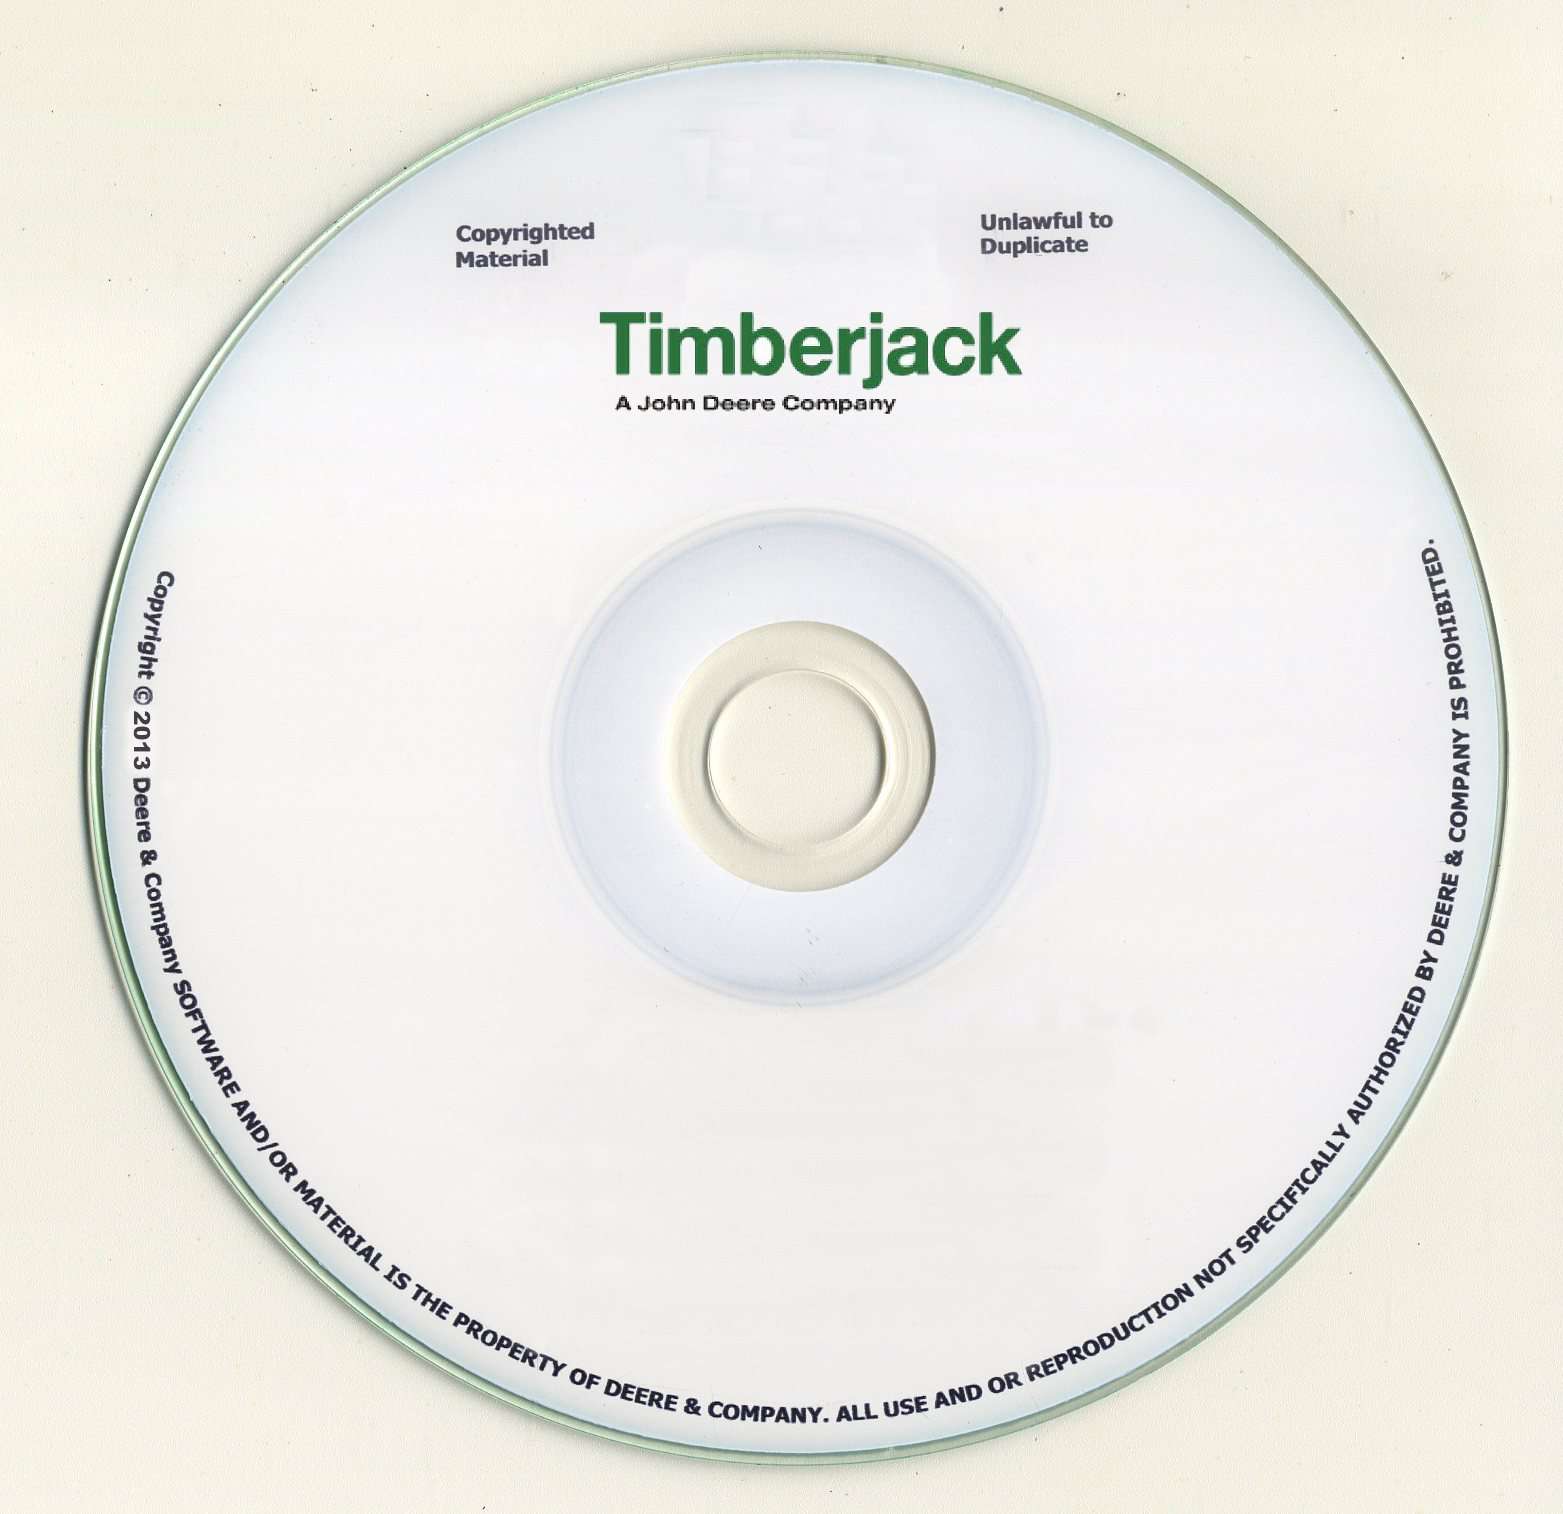 Hydraulic System Schematic Technical Manual on CD for Timberjack L Series model 848l Skidders